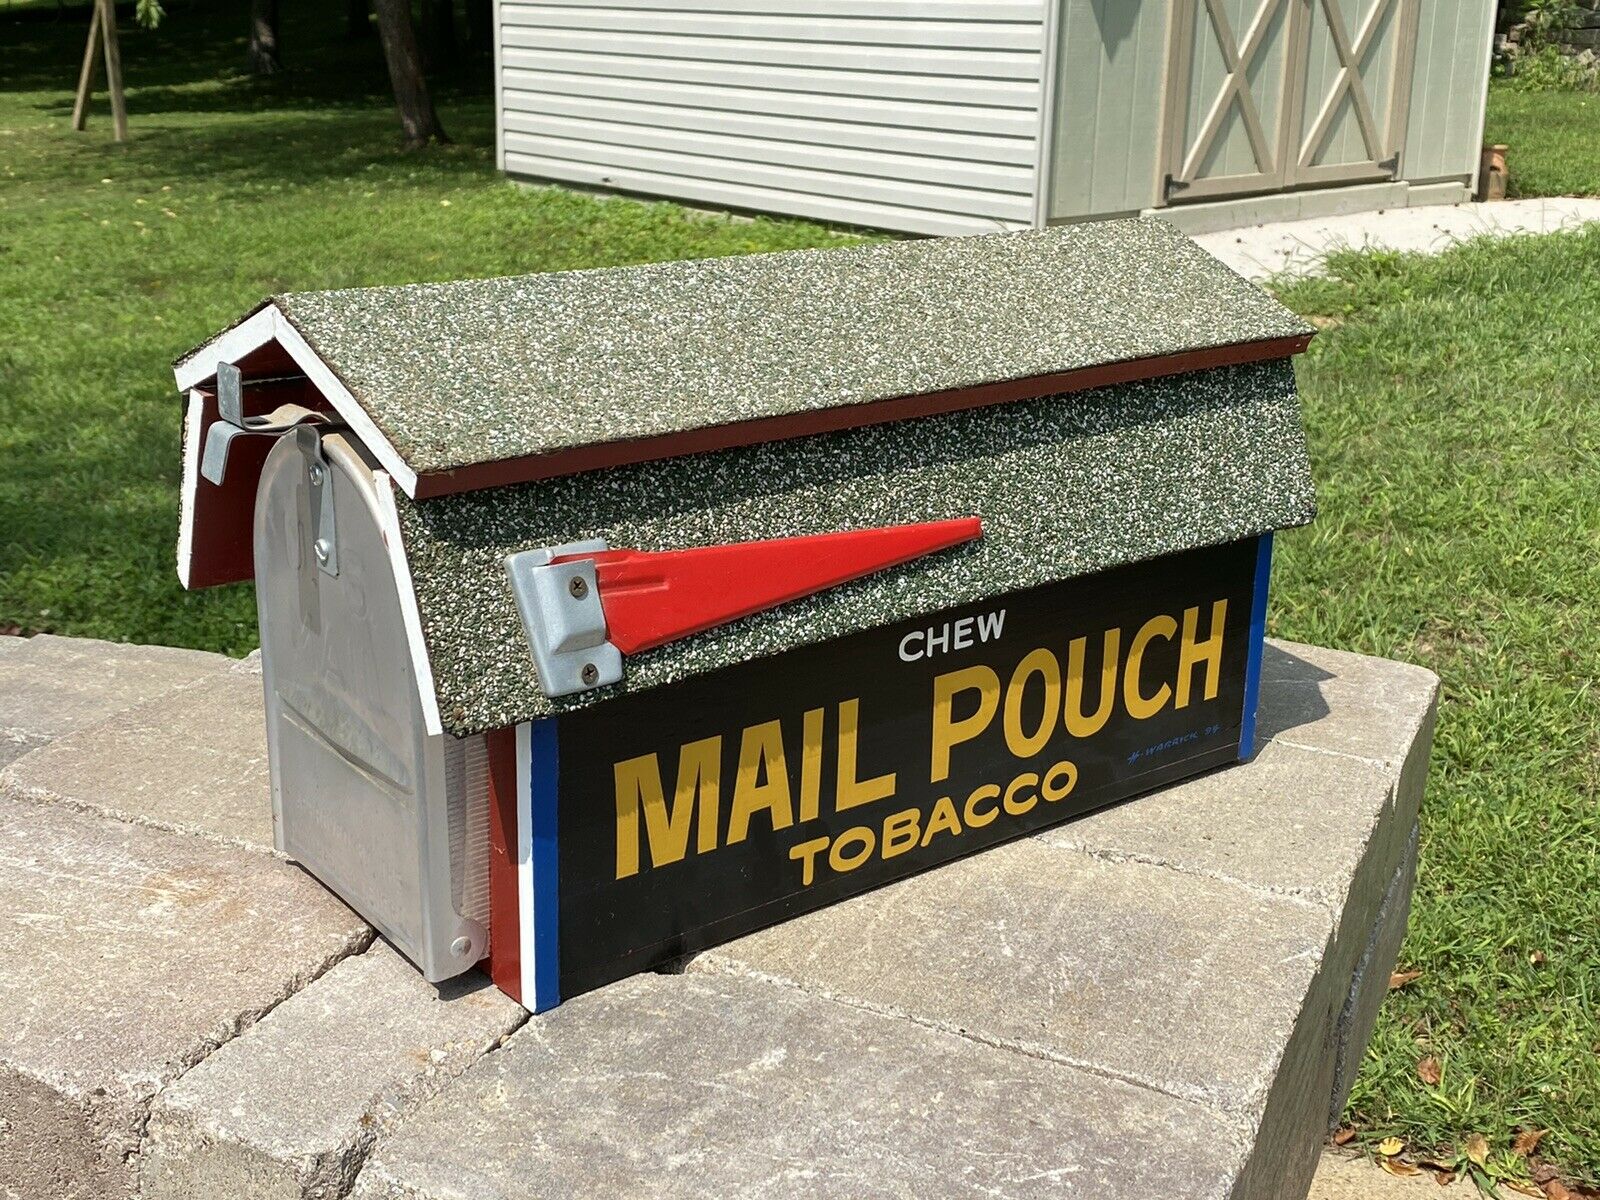 Vintage Mail Pouch Tobacco Barn Mail Box Signed By Harley Warrwick 1994